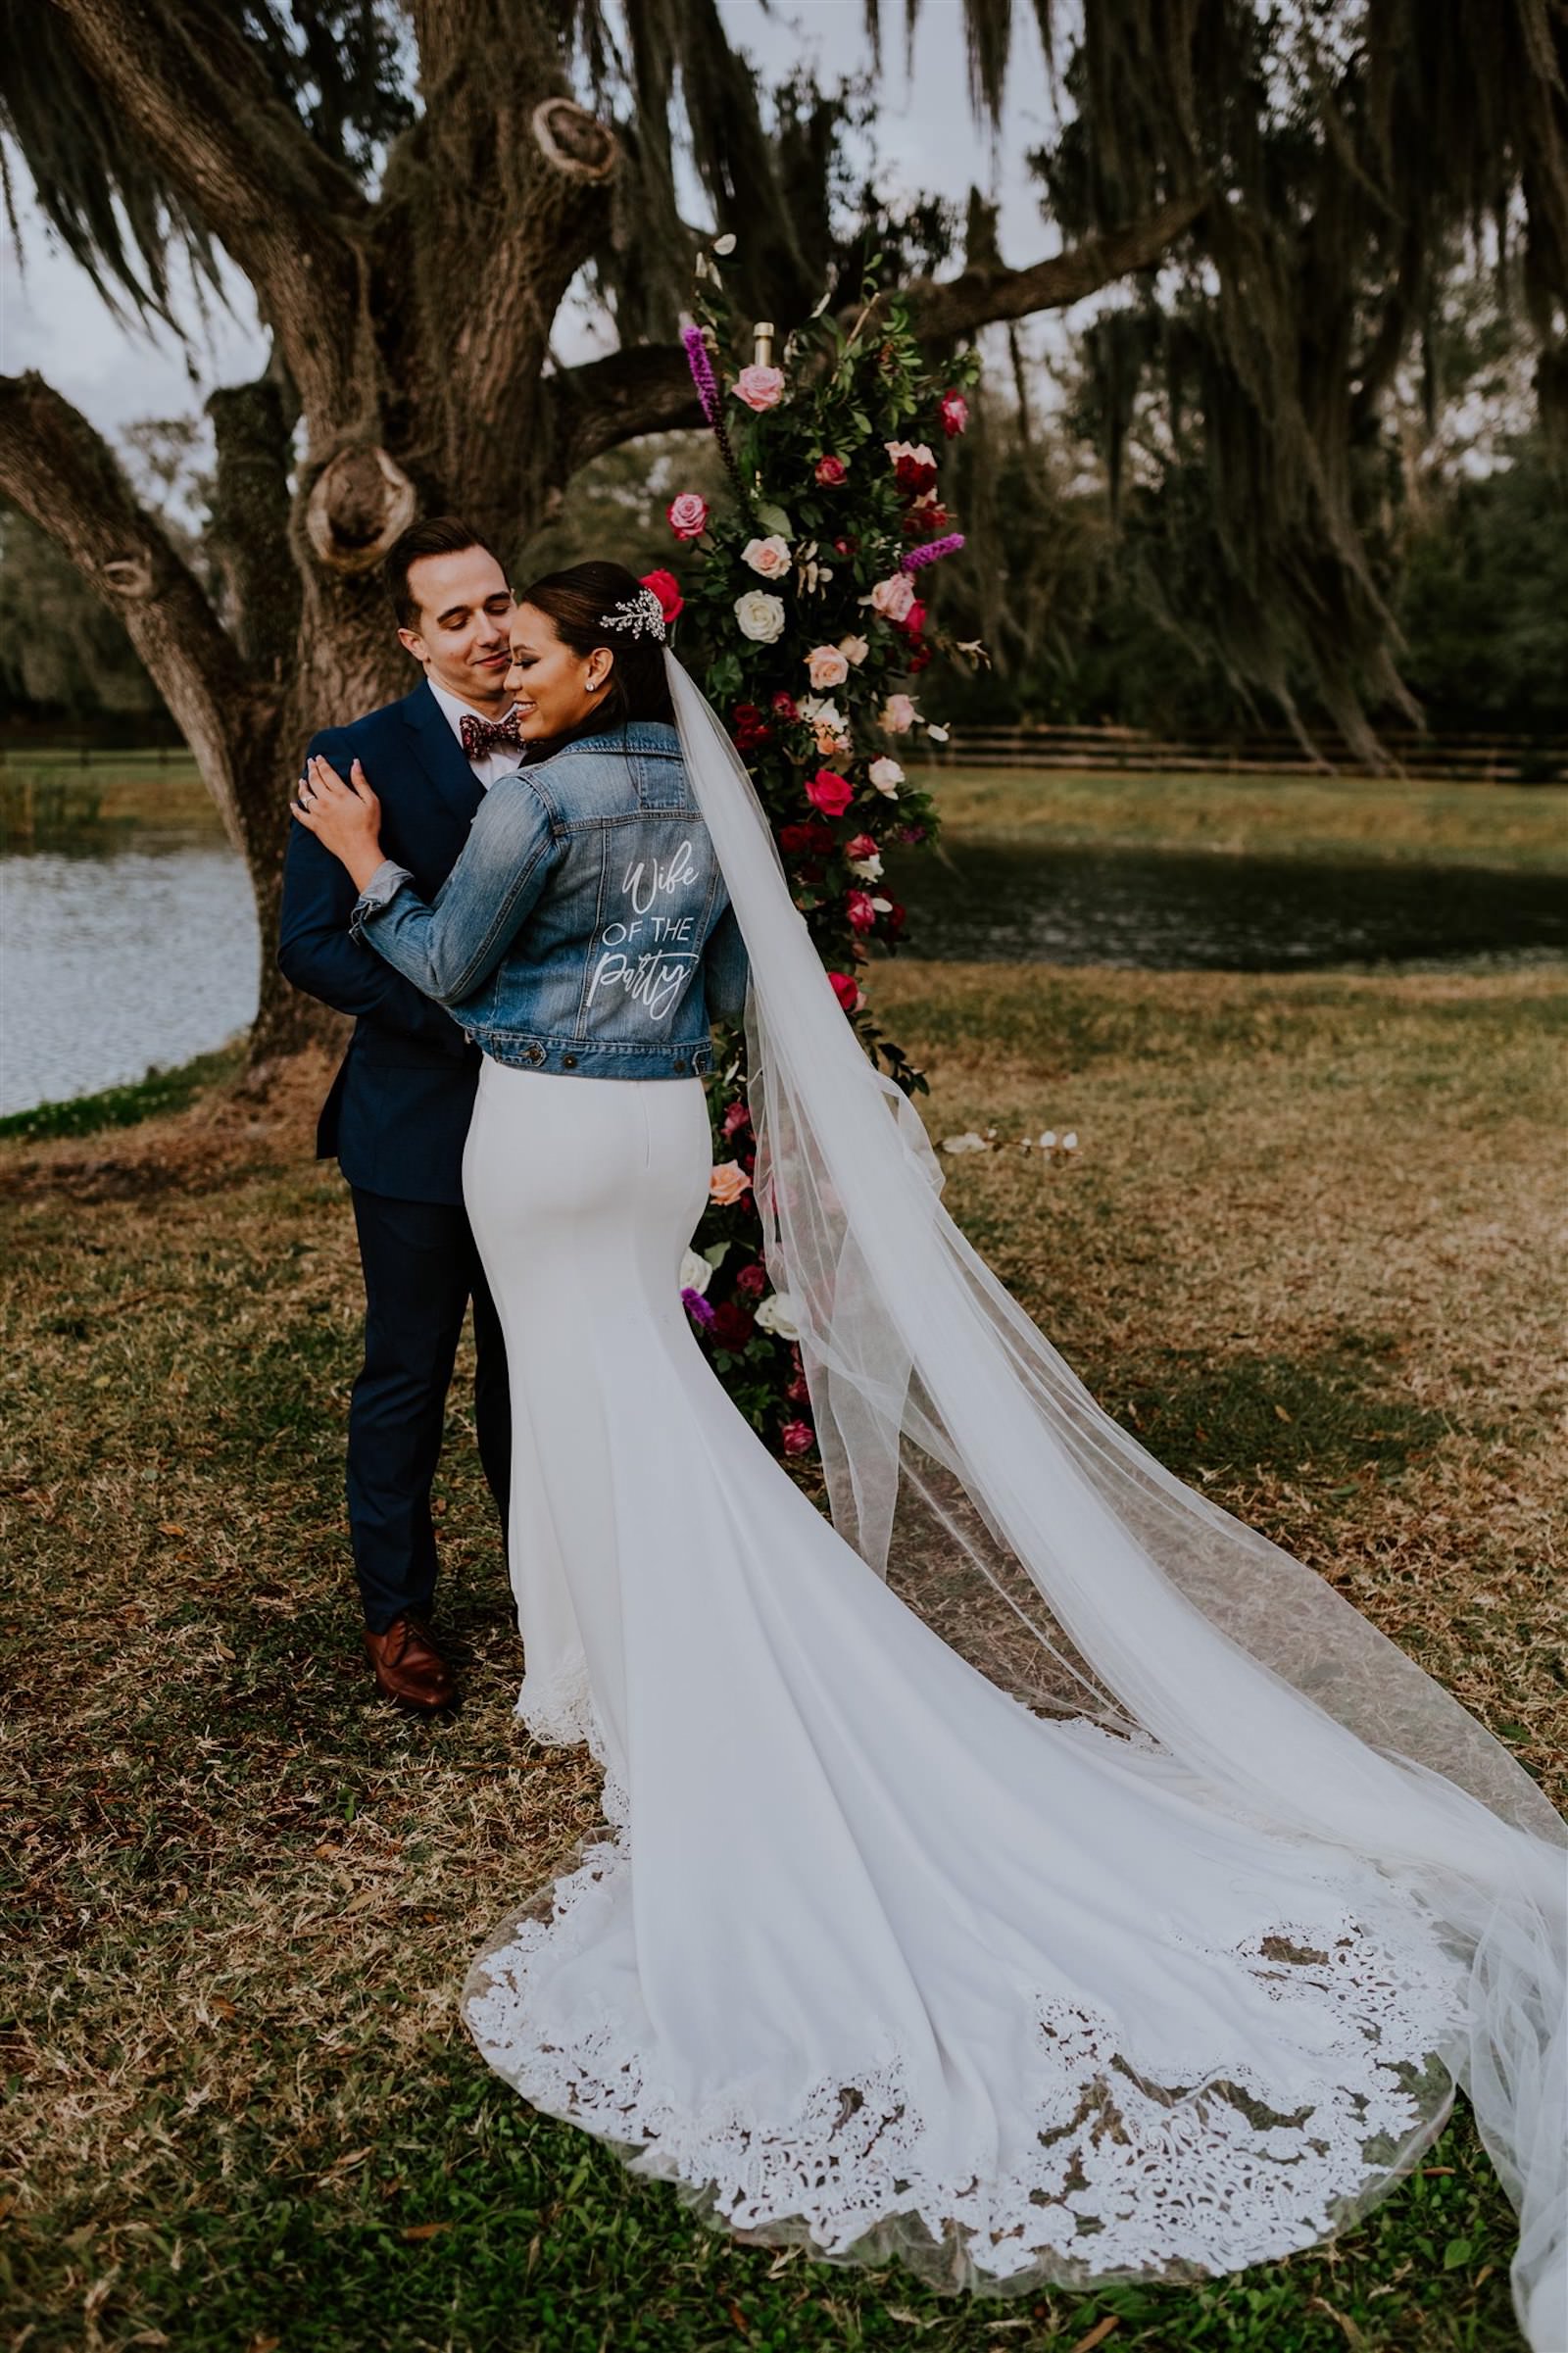 Bride and Groom Outdoor Wedding Portrait with Jean Jacket and Lace Wedding Dress